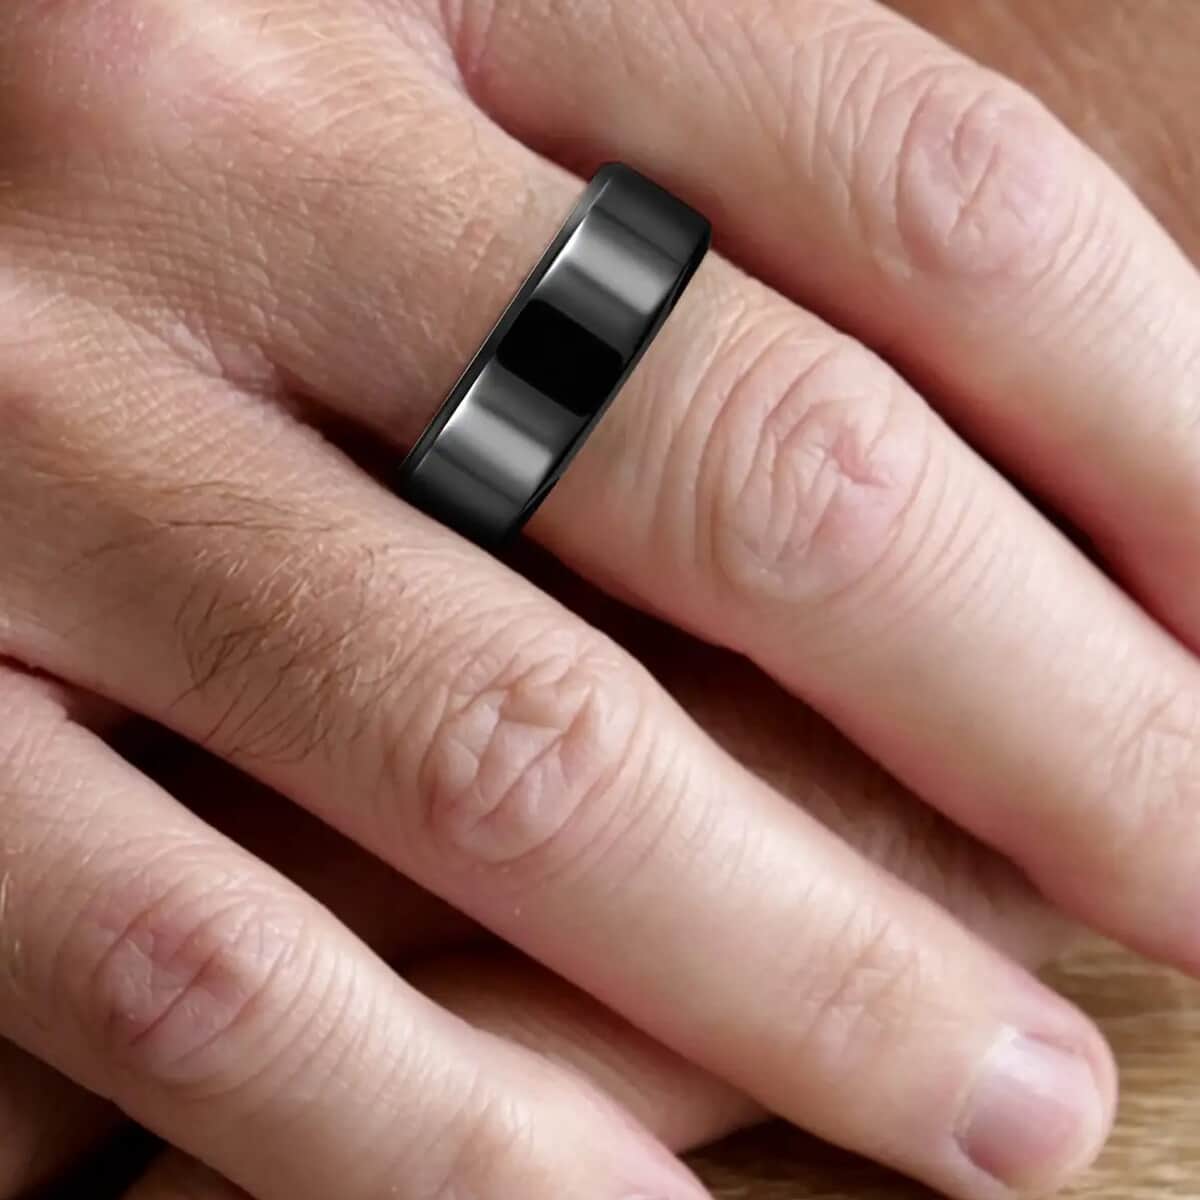 Soulsmart Multifunctional Health Tracker Smart Ring (Size 7.0) in ION Plated Black Stainless Steel (Compatible with Android 5.0+ & Apple IOS 10.0+ Systems) (Del. in 10-15 Days) image number 8